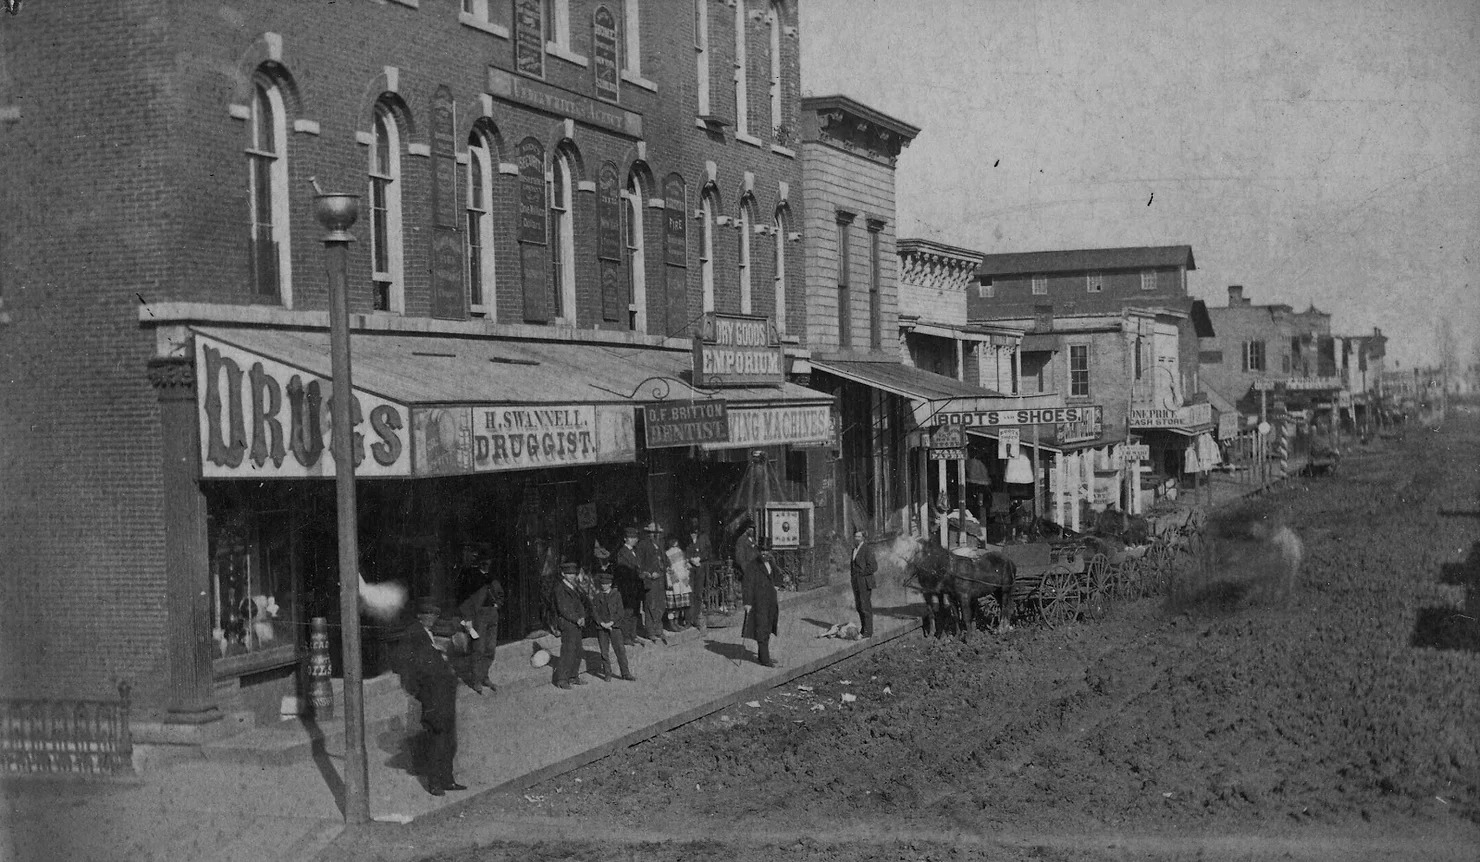 A black-and-white photo of 1 East Main Street in Champaign, Illinois. There is a dirt road with horses, and men in top hats on the sideway. Photo credit to Champaign County Historical Archives at The Urbana Free Library.